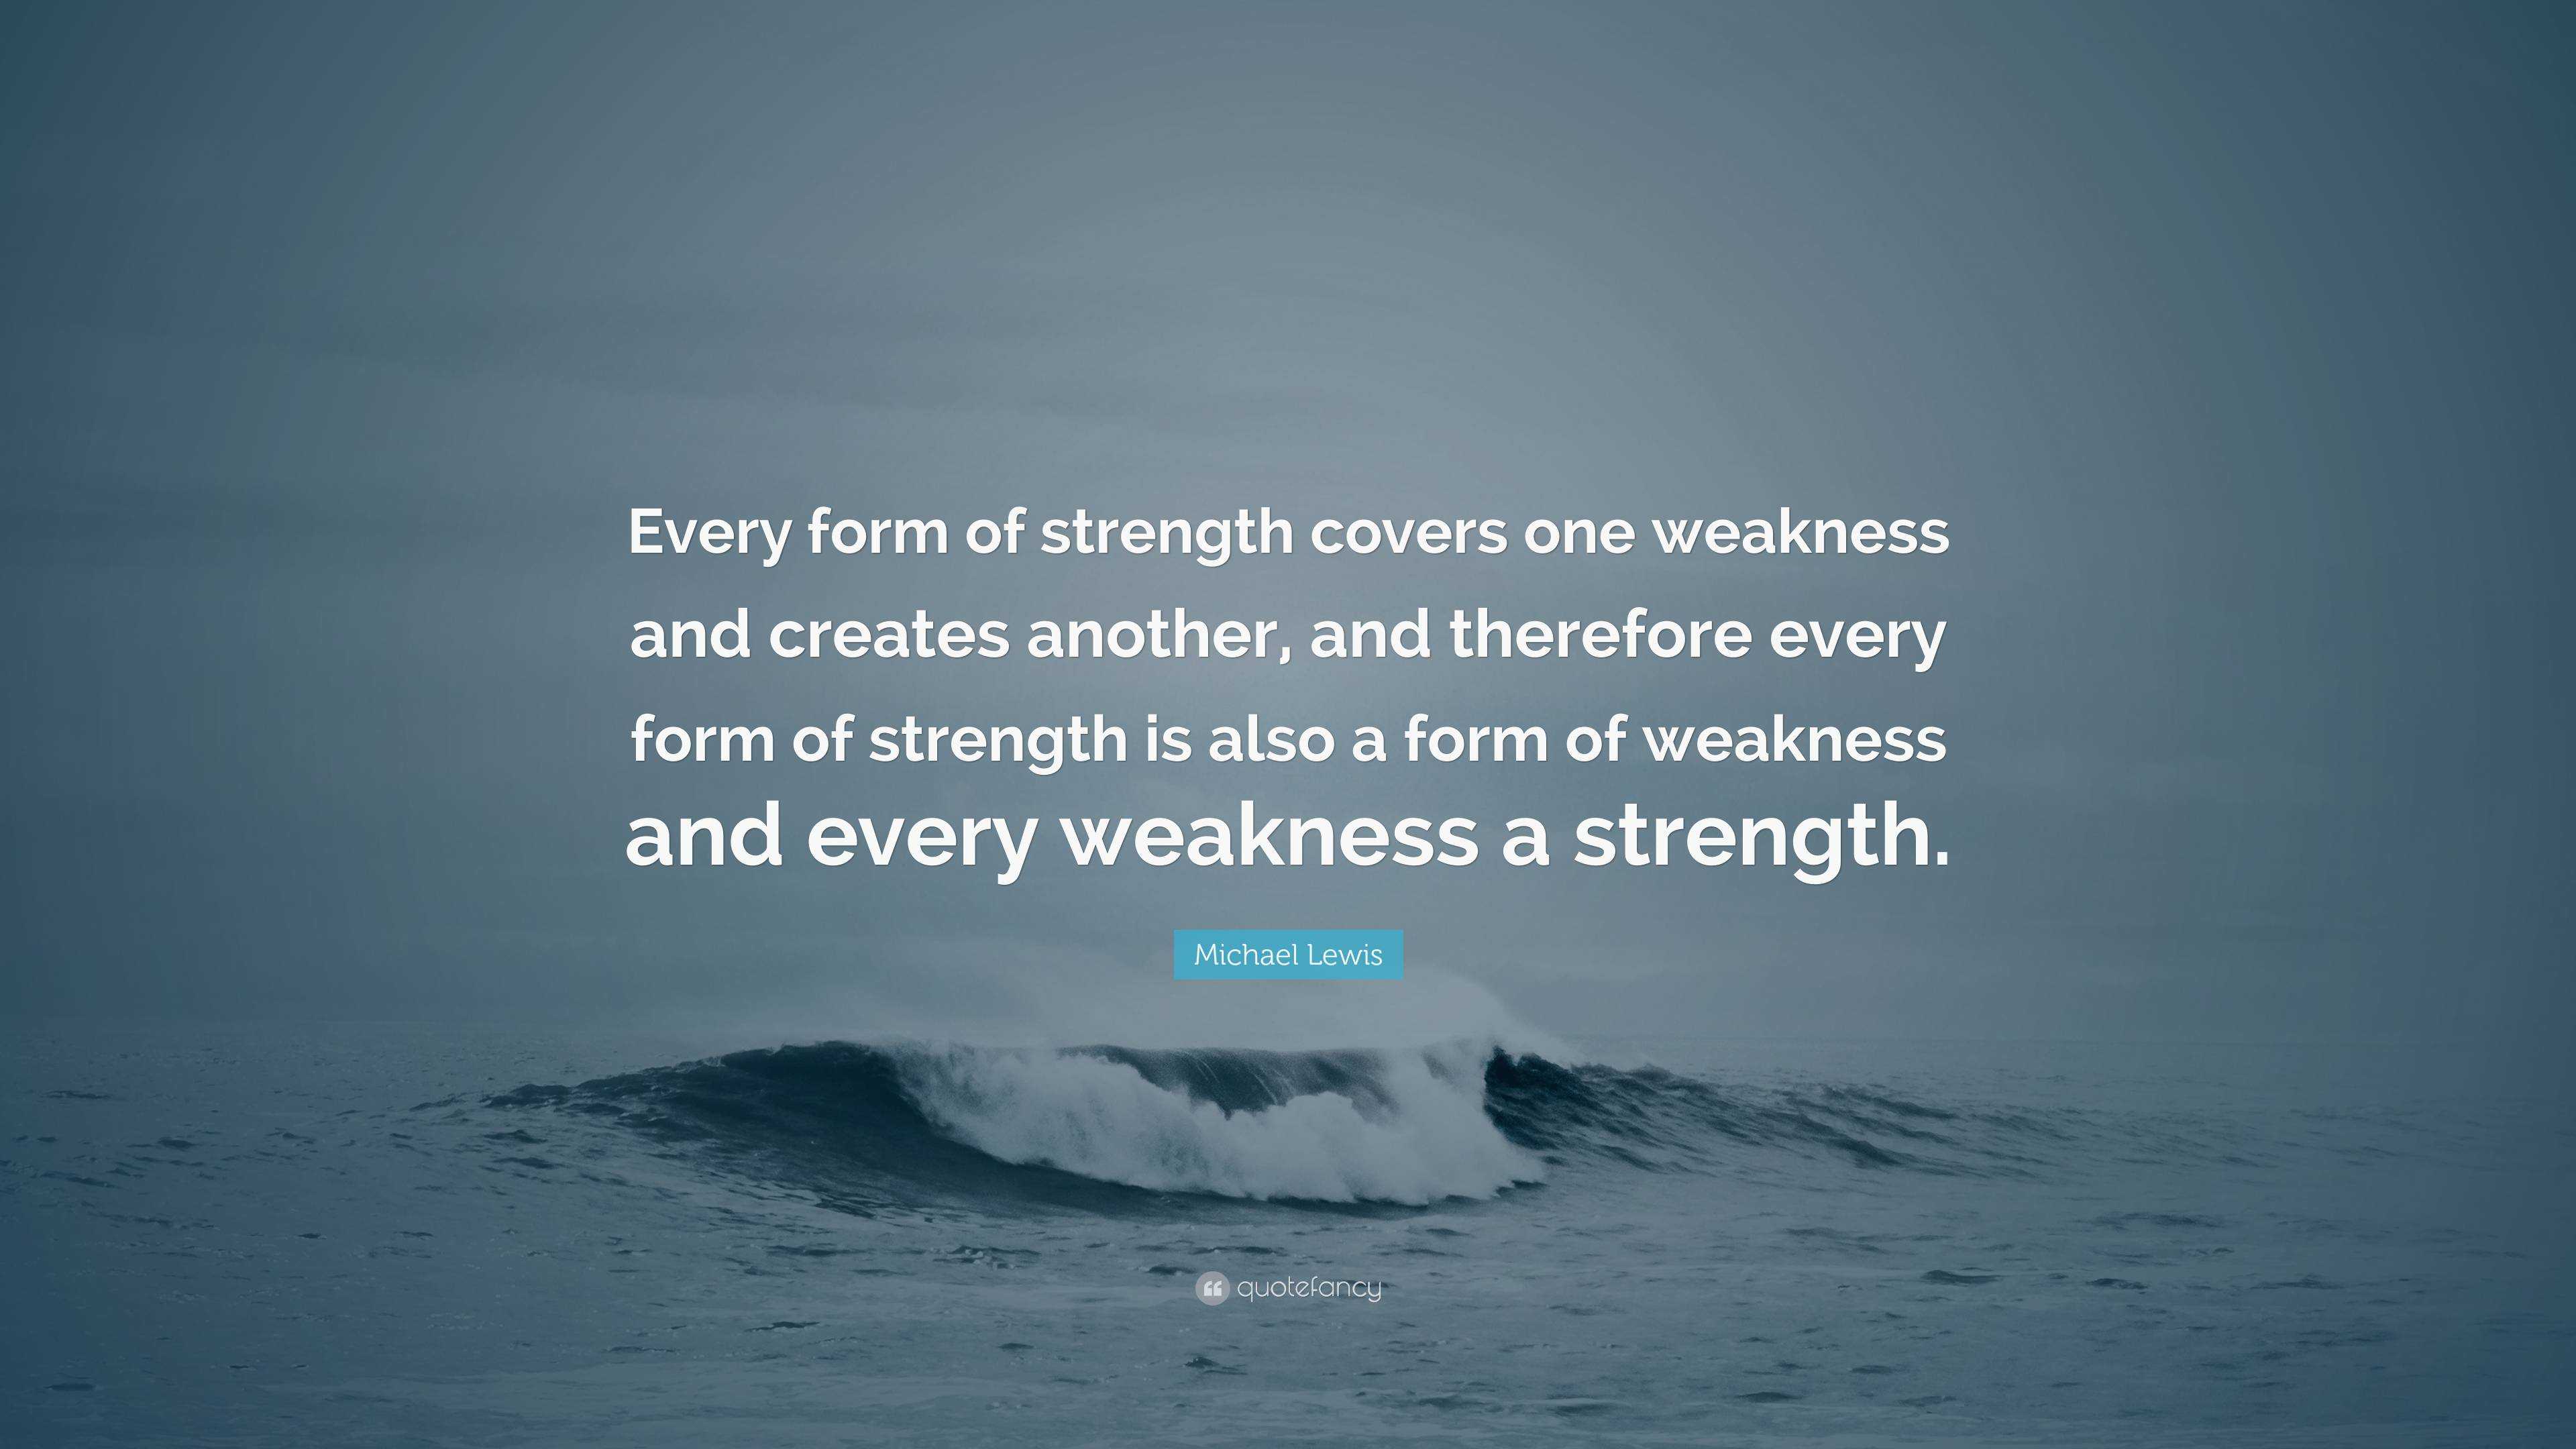 Michael Lewis Quote: “Every form of strength covers one weakness and ...